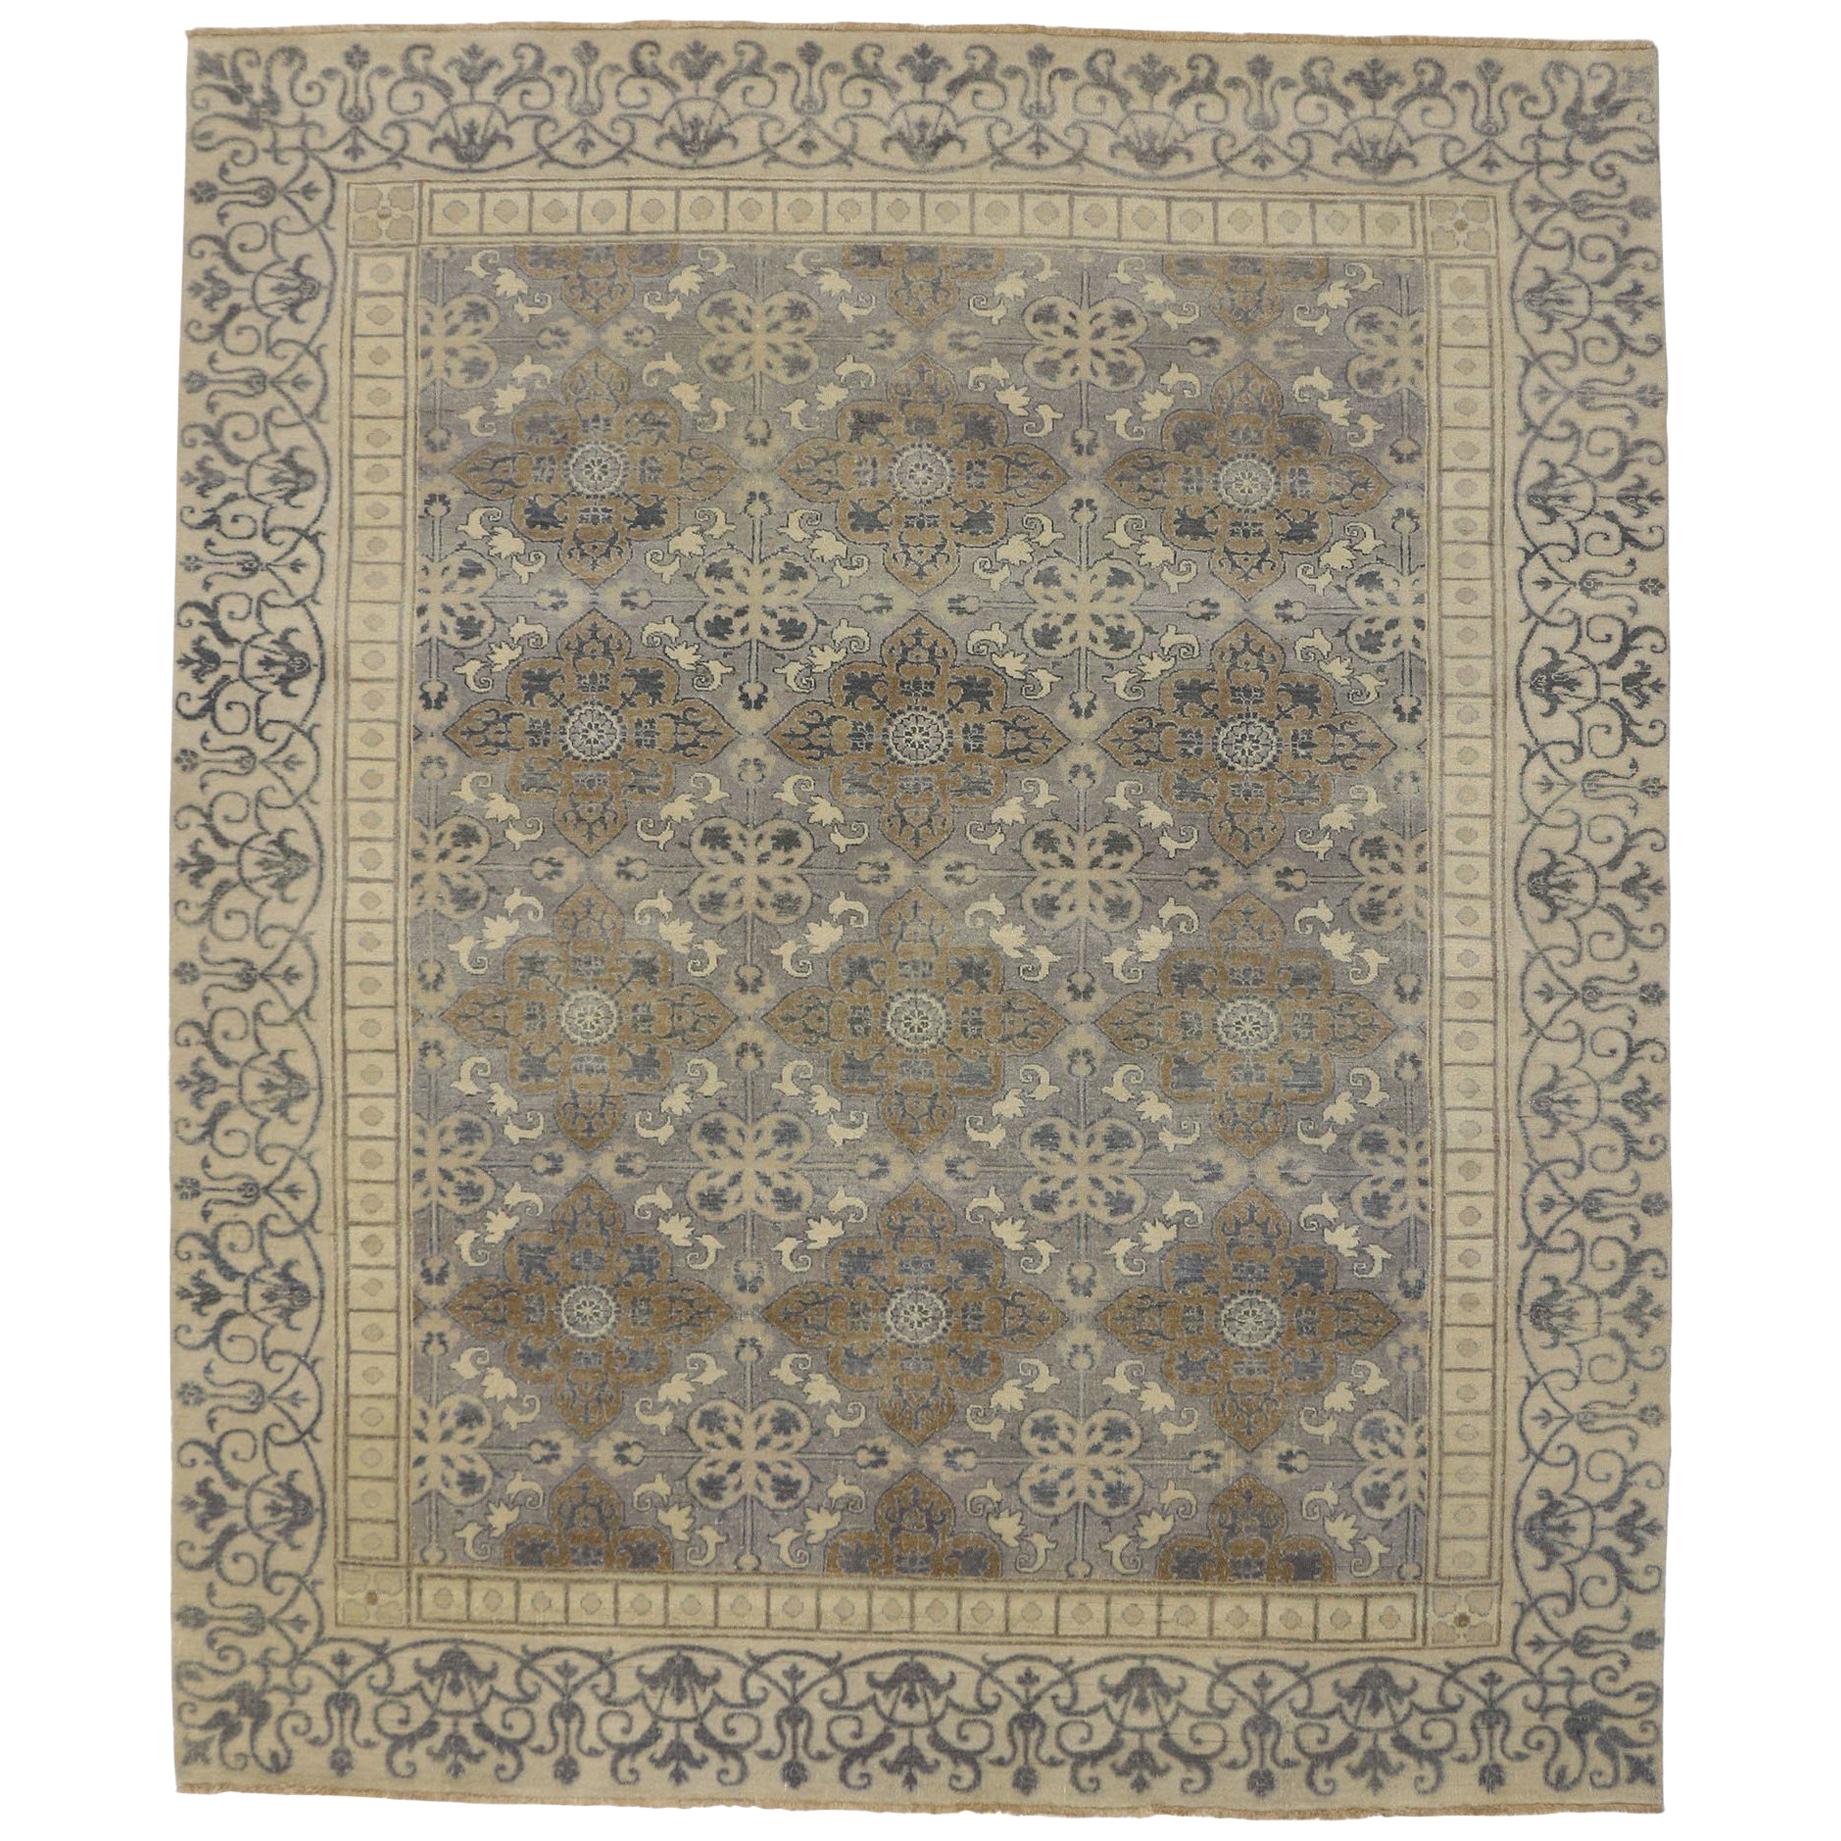 New Transitional Area Rug with Khotan Pattern and Modernist Neoclassic Style For Sale